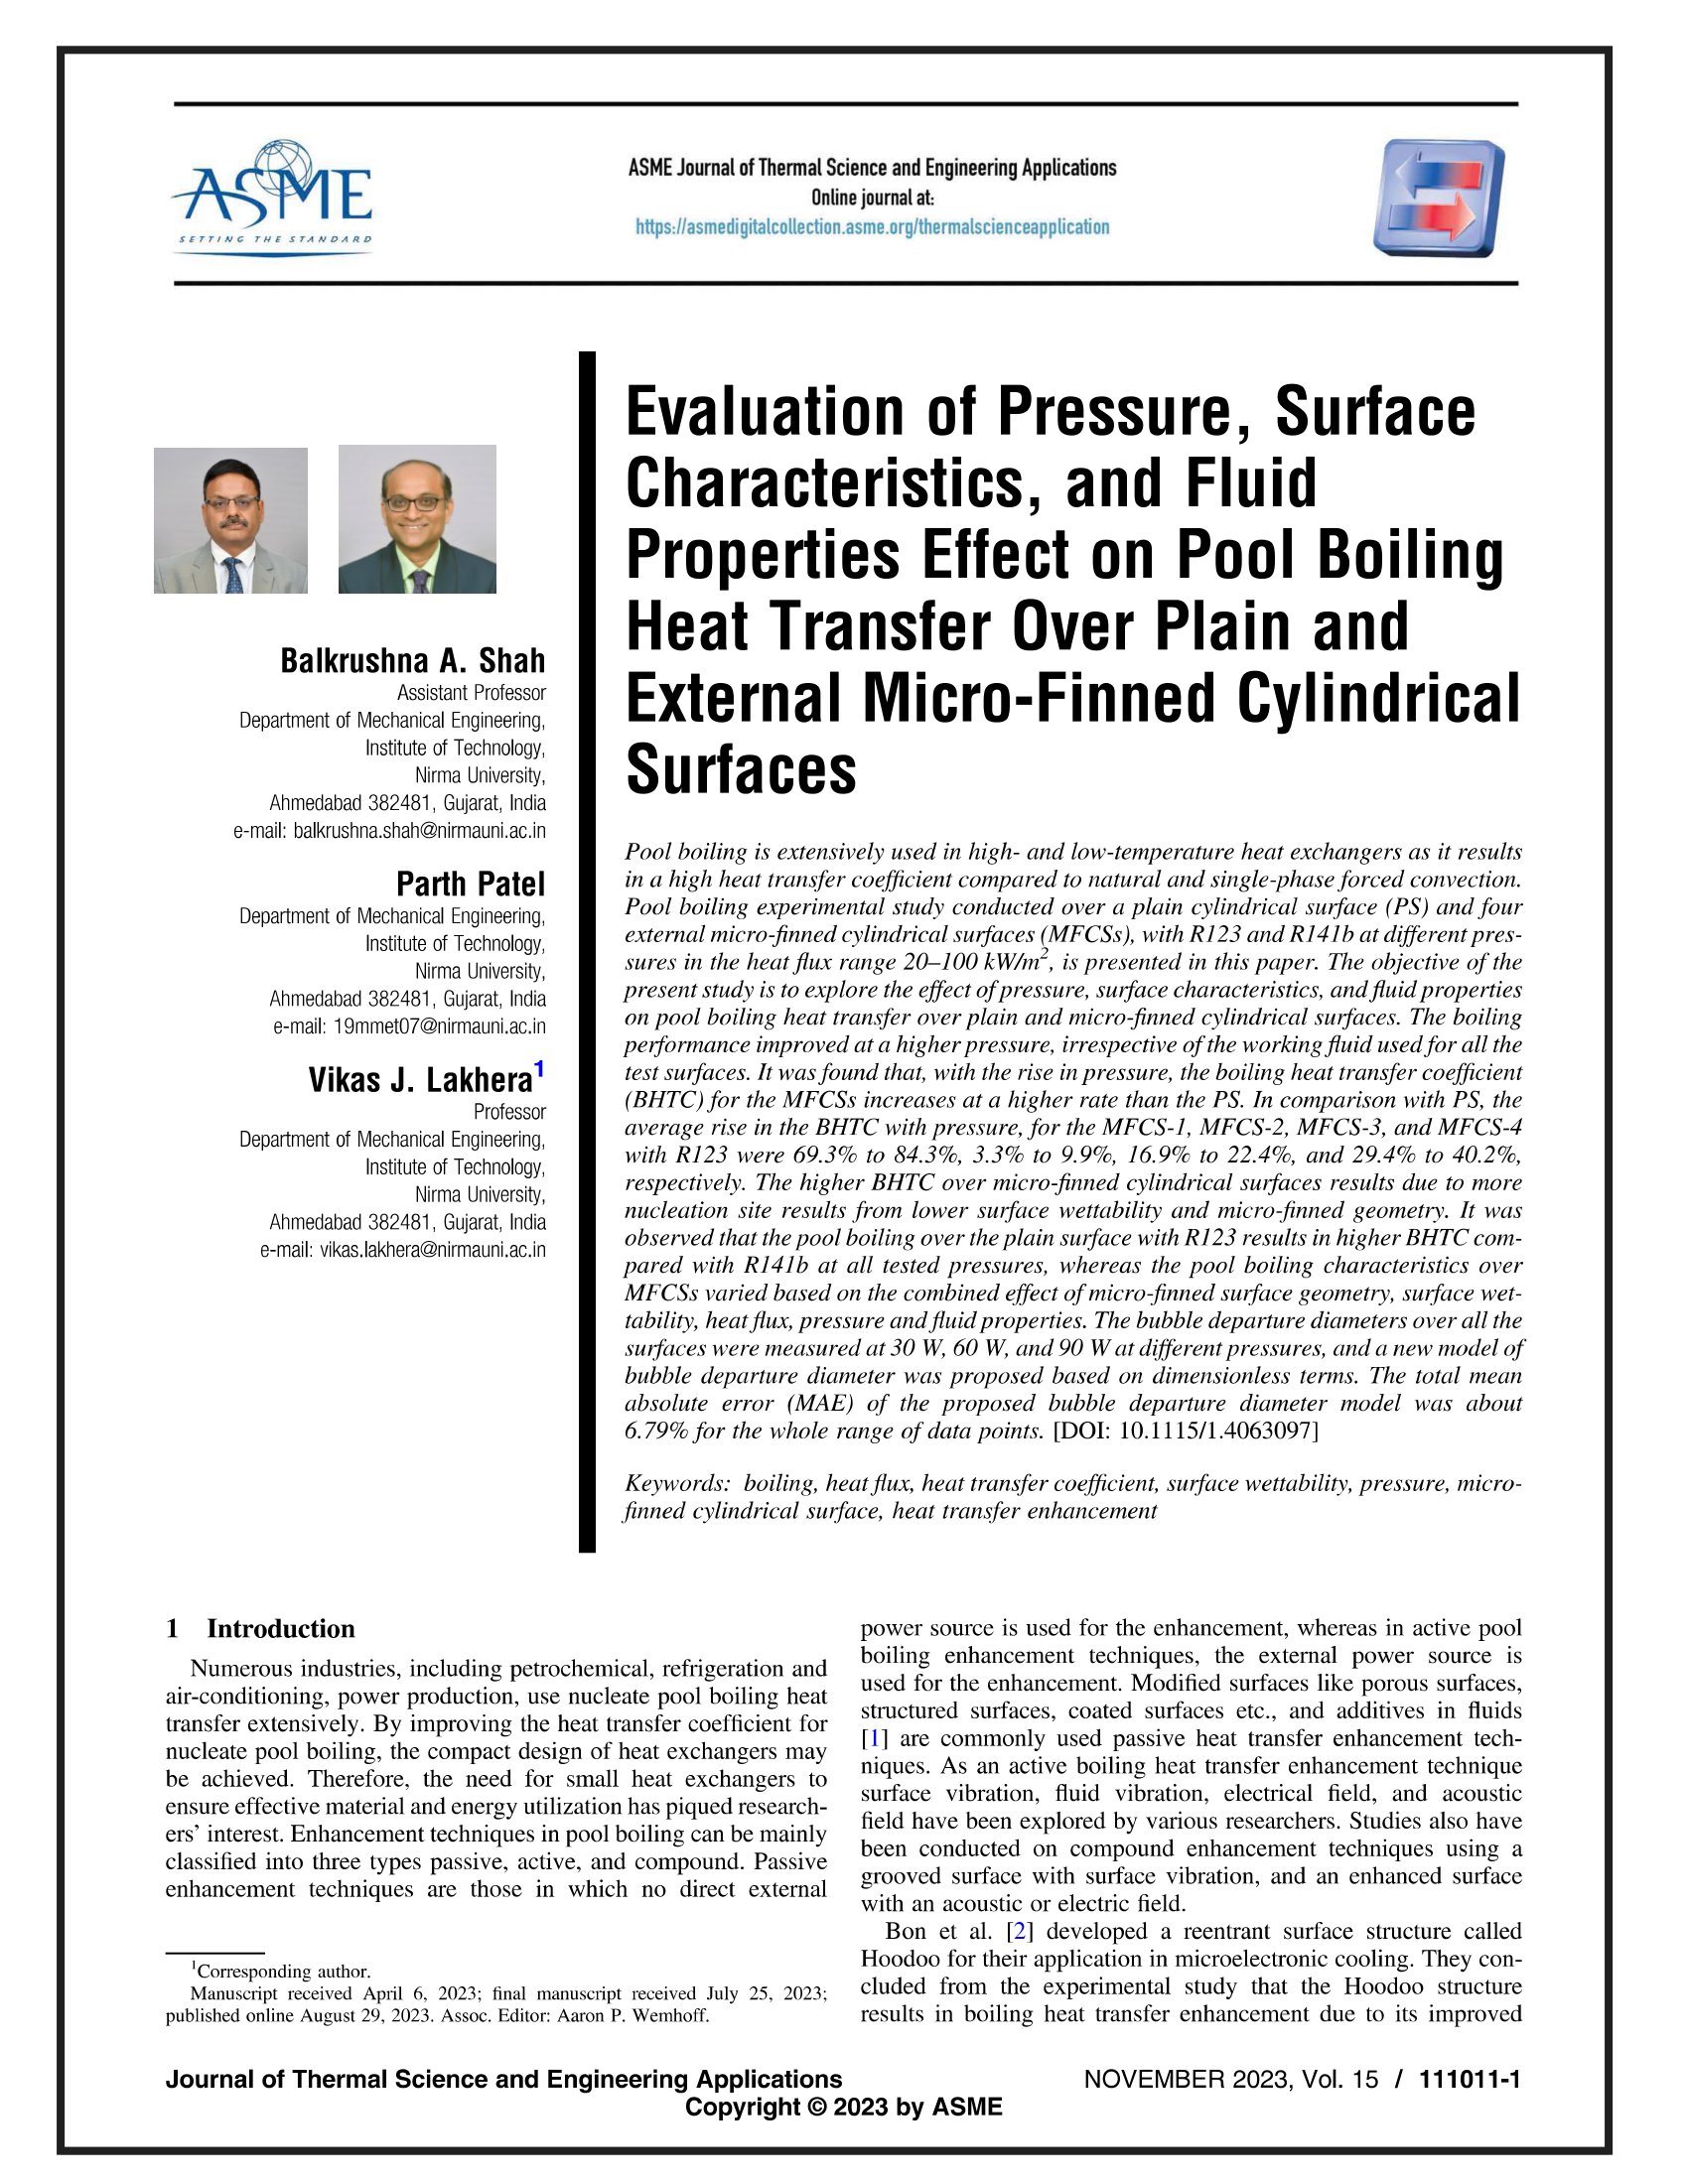 Evaluation of Pressure, Surface Characteristics, and Fluid Properties Effect on Pool Boiling Heat Transfer Over Plain and External Micro-Finned Cylindrical Surfaces